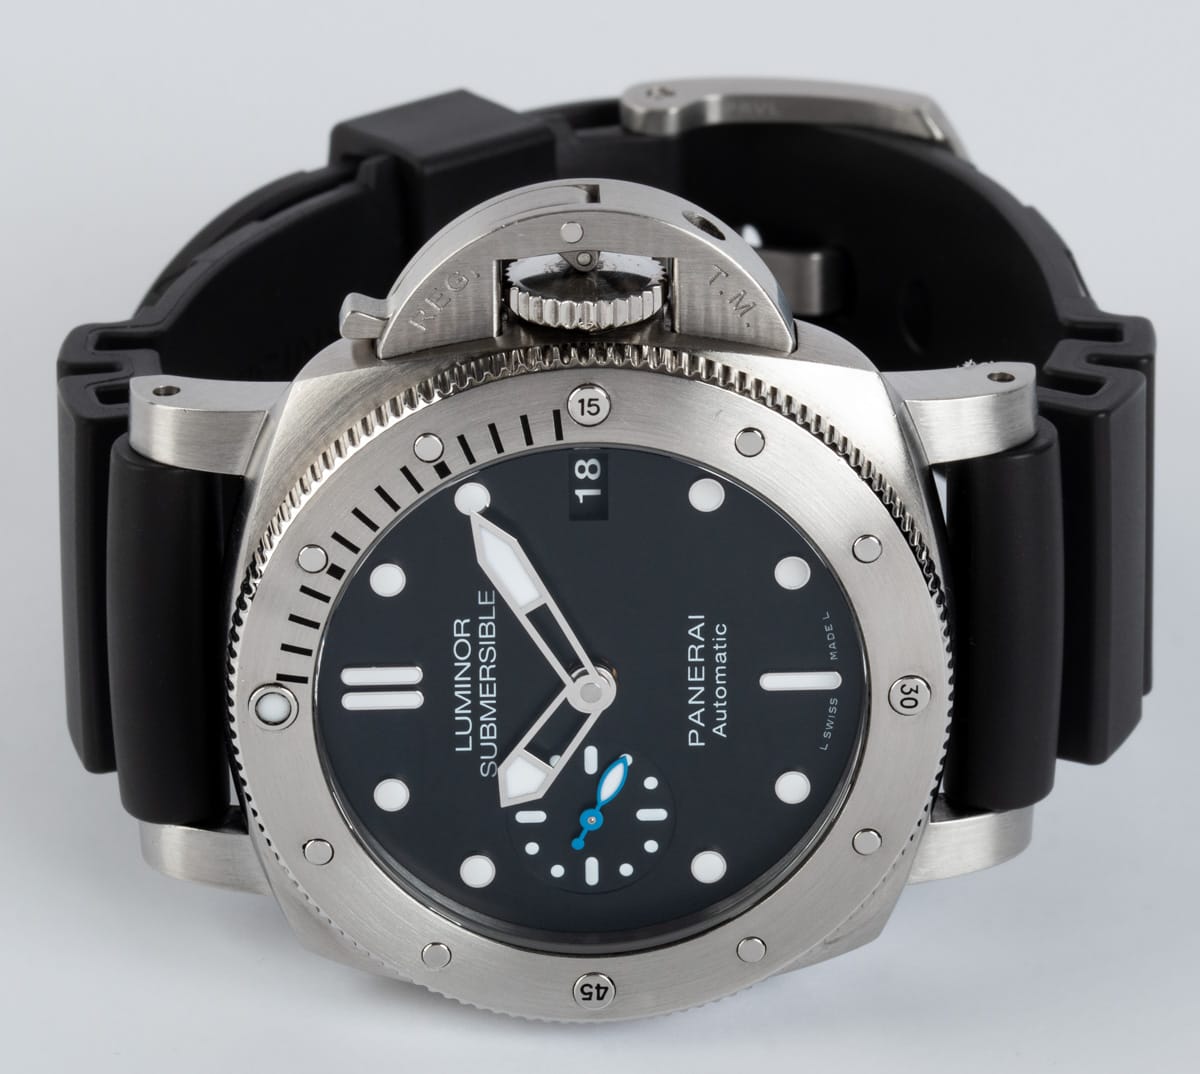 Front View of Luminor Submersible 1950 3 Days Auto 42mm